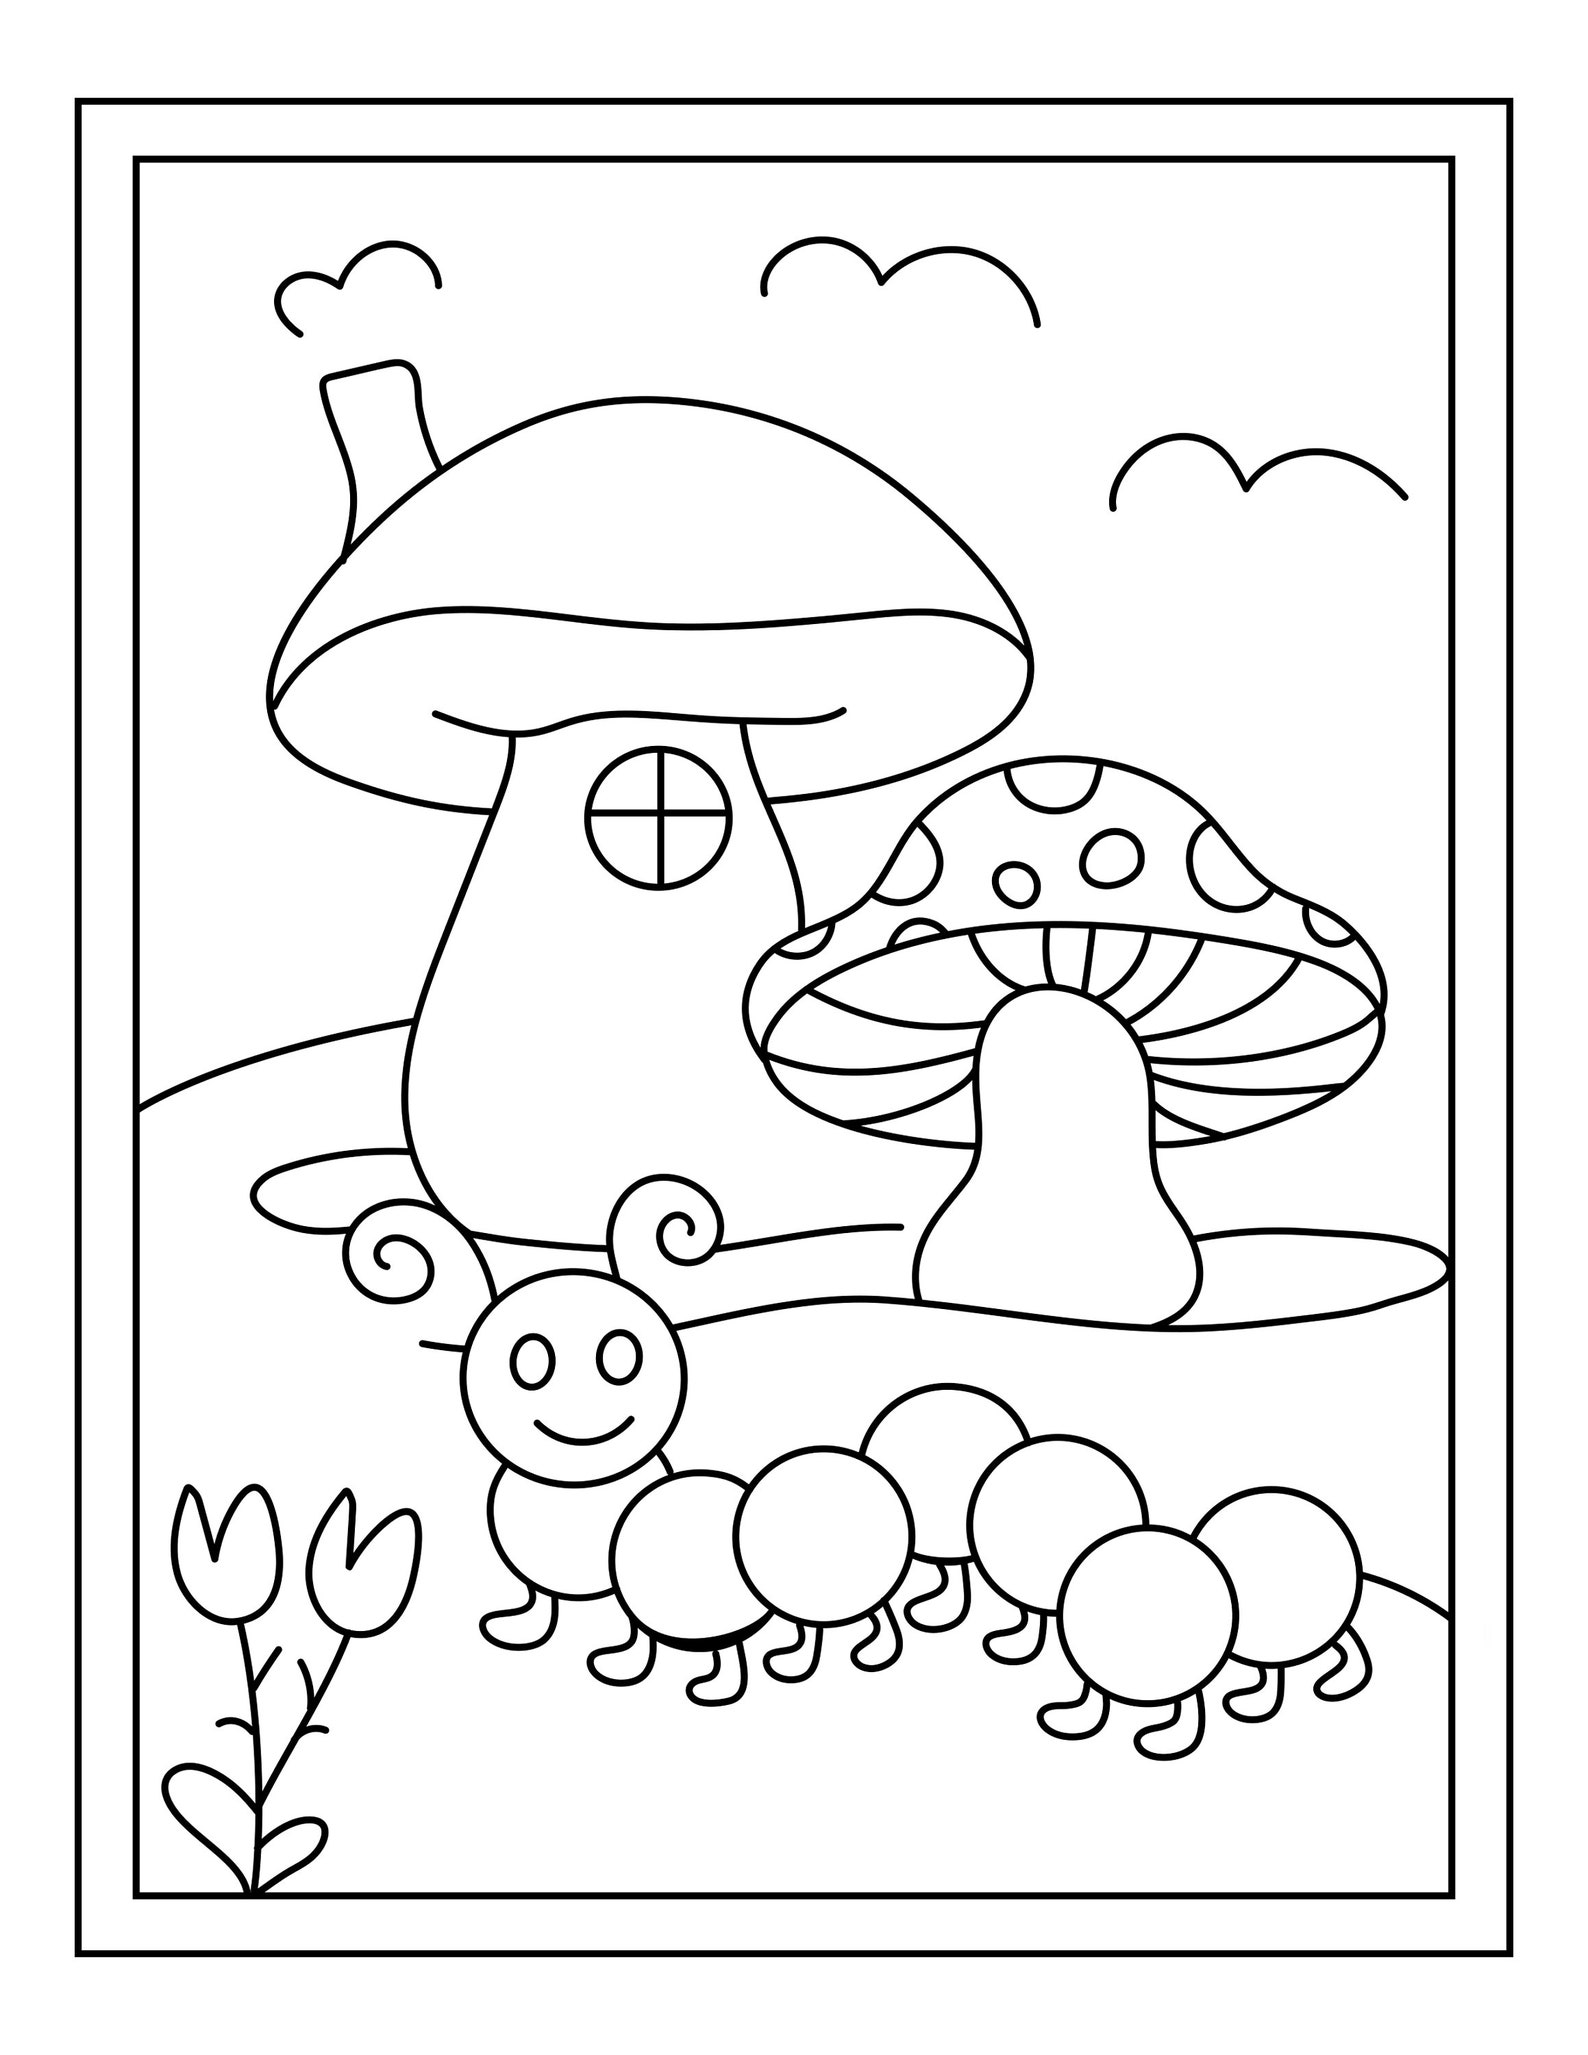 printable-nature-coloring-pages-for-kids-cool2bkids-nature-around-the